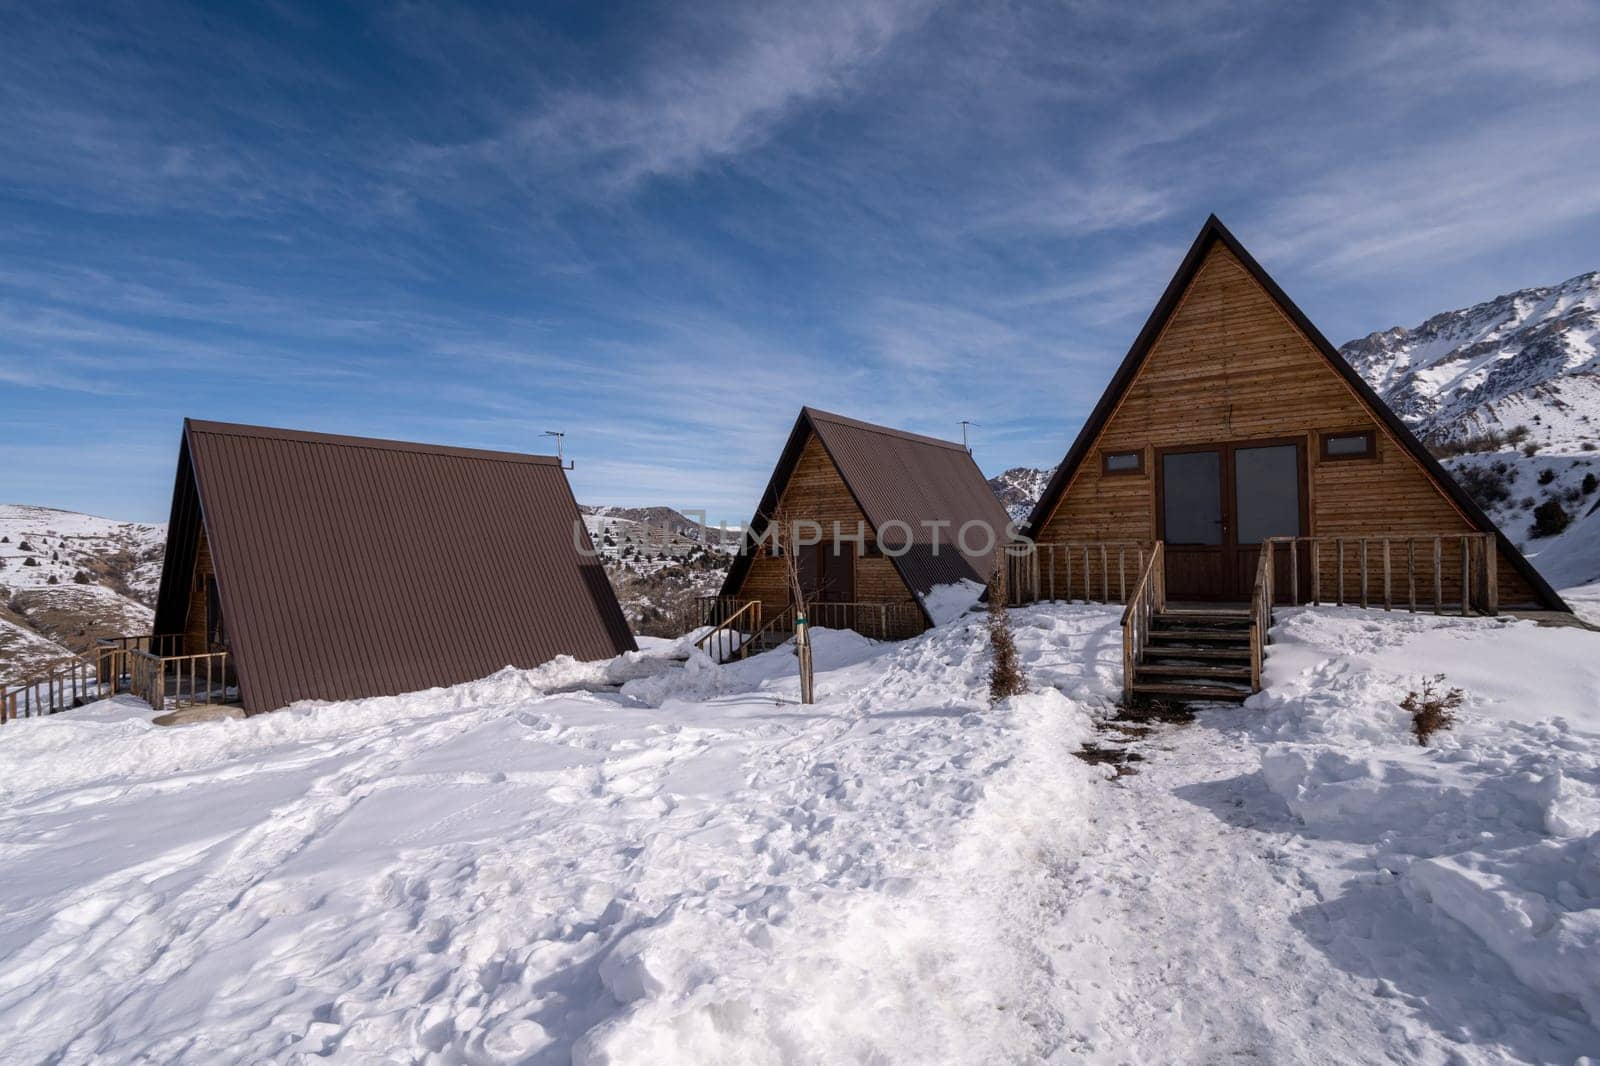 The wooden cottages surrounded by snow. A recreation area in the mountains by A_Karim